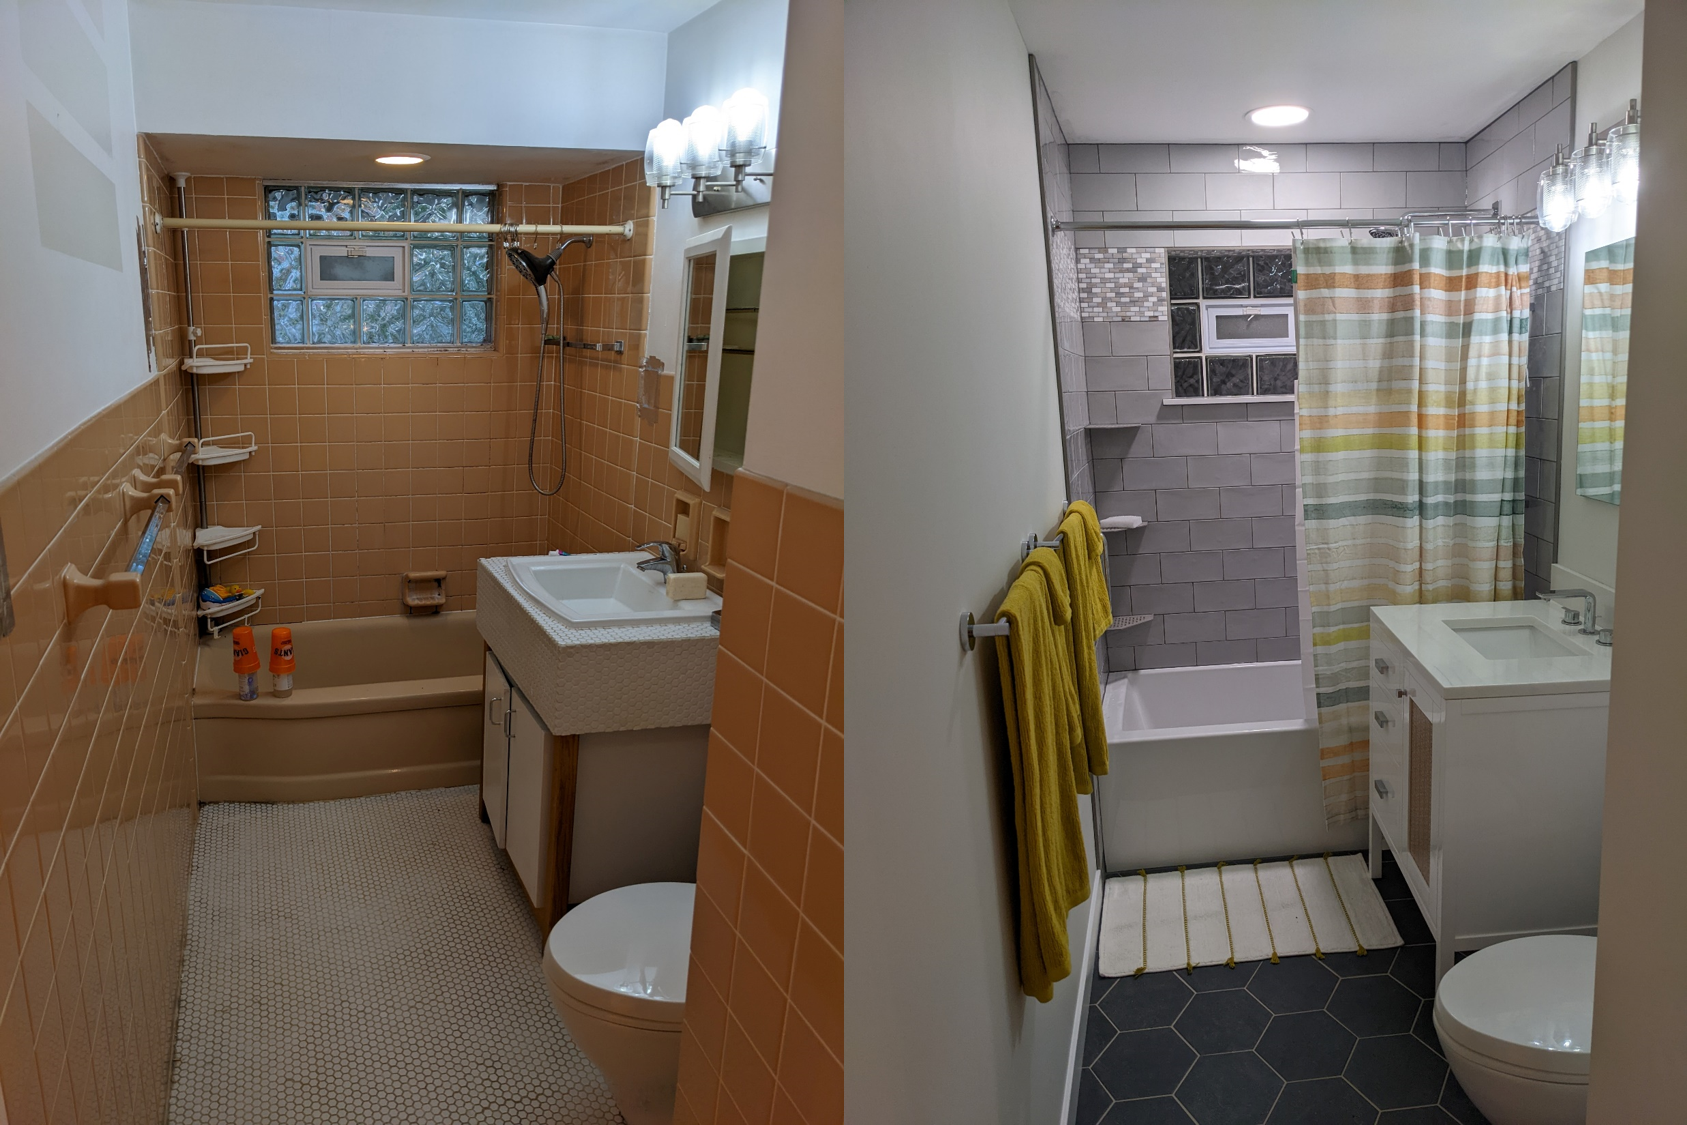 broadview bathroom before and after.png